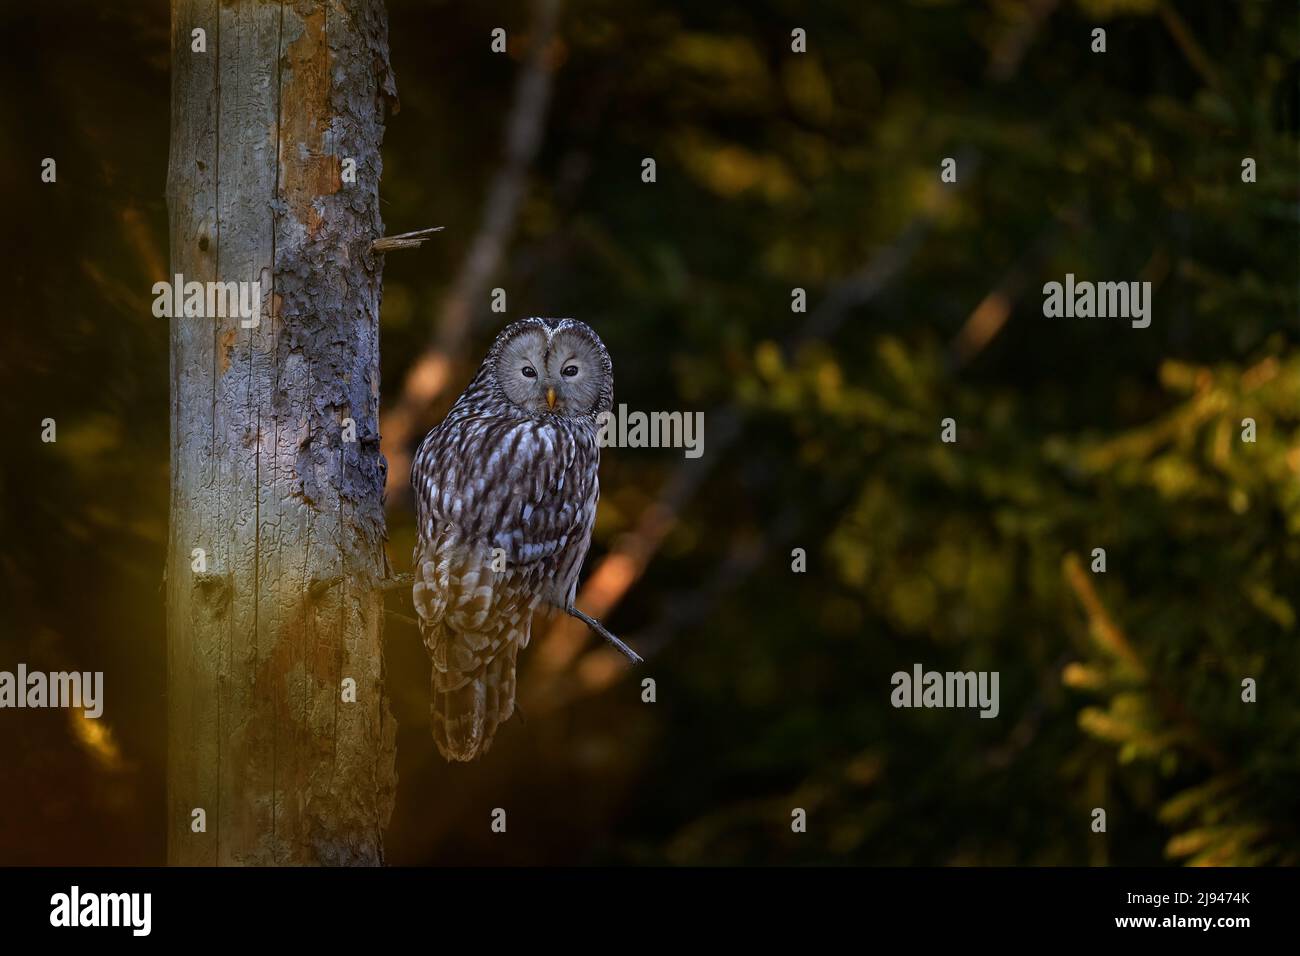 Owl in the spruce tree forest habitat, Slovakia. Ural Owl, Strix uralensis, sitting on tree branch, in green leaves oak forest, Wildlife scene from na Stock Photo